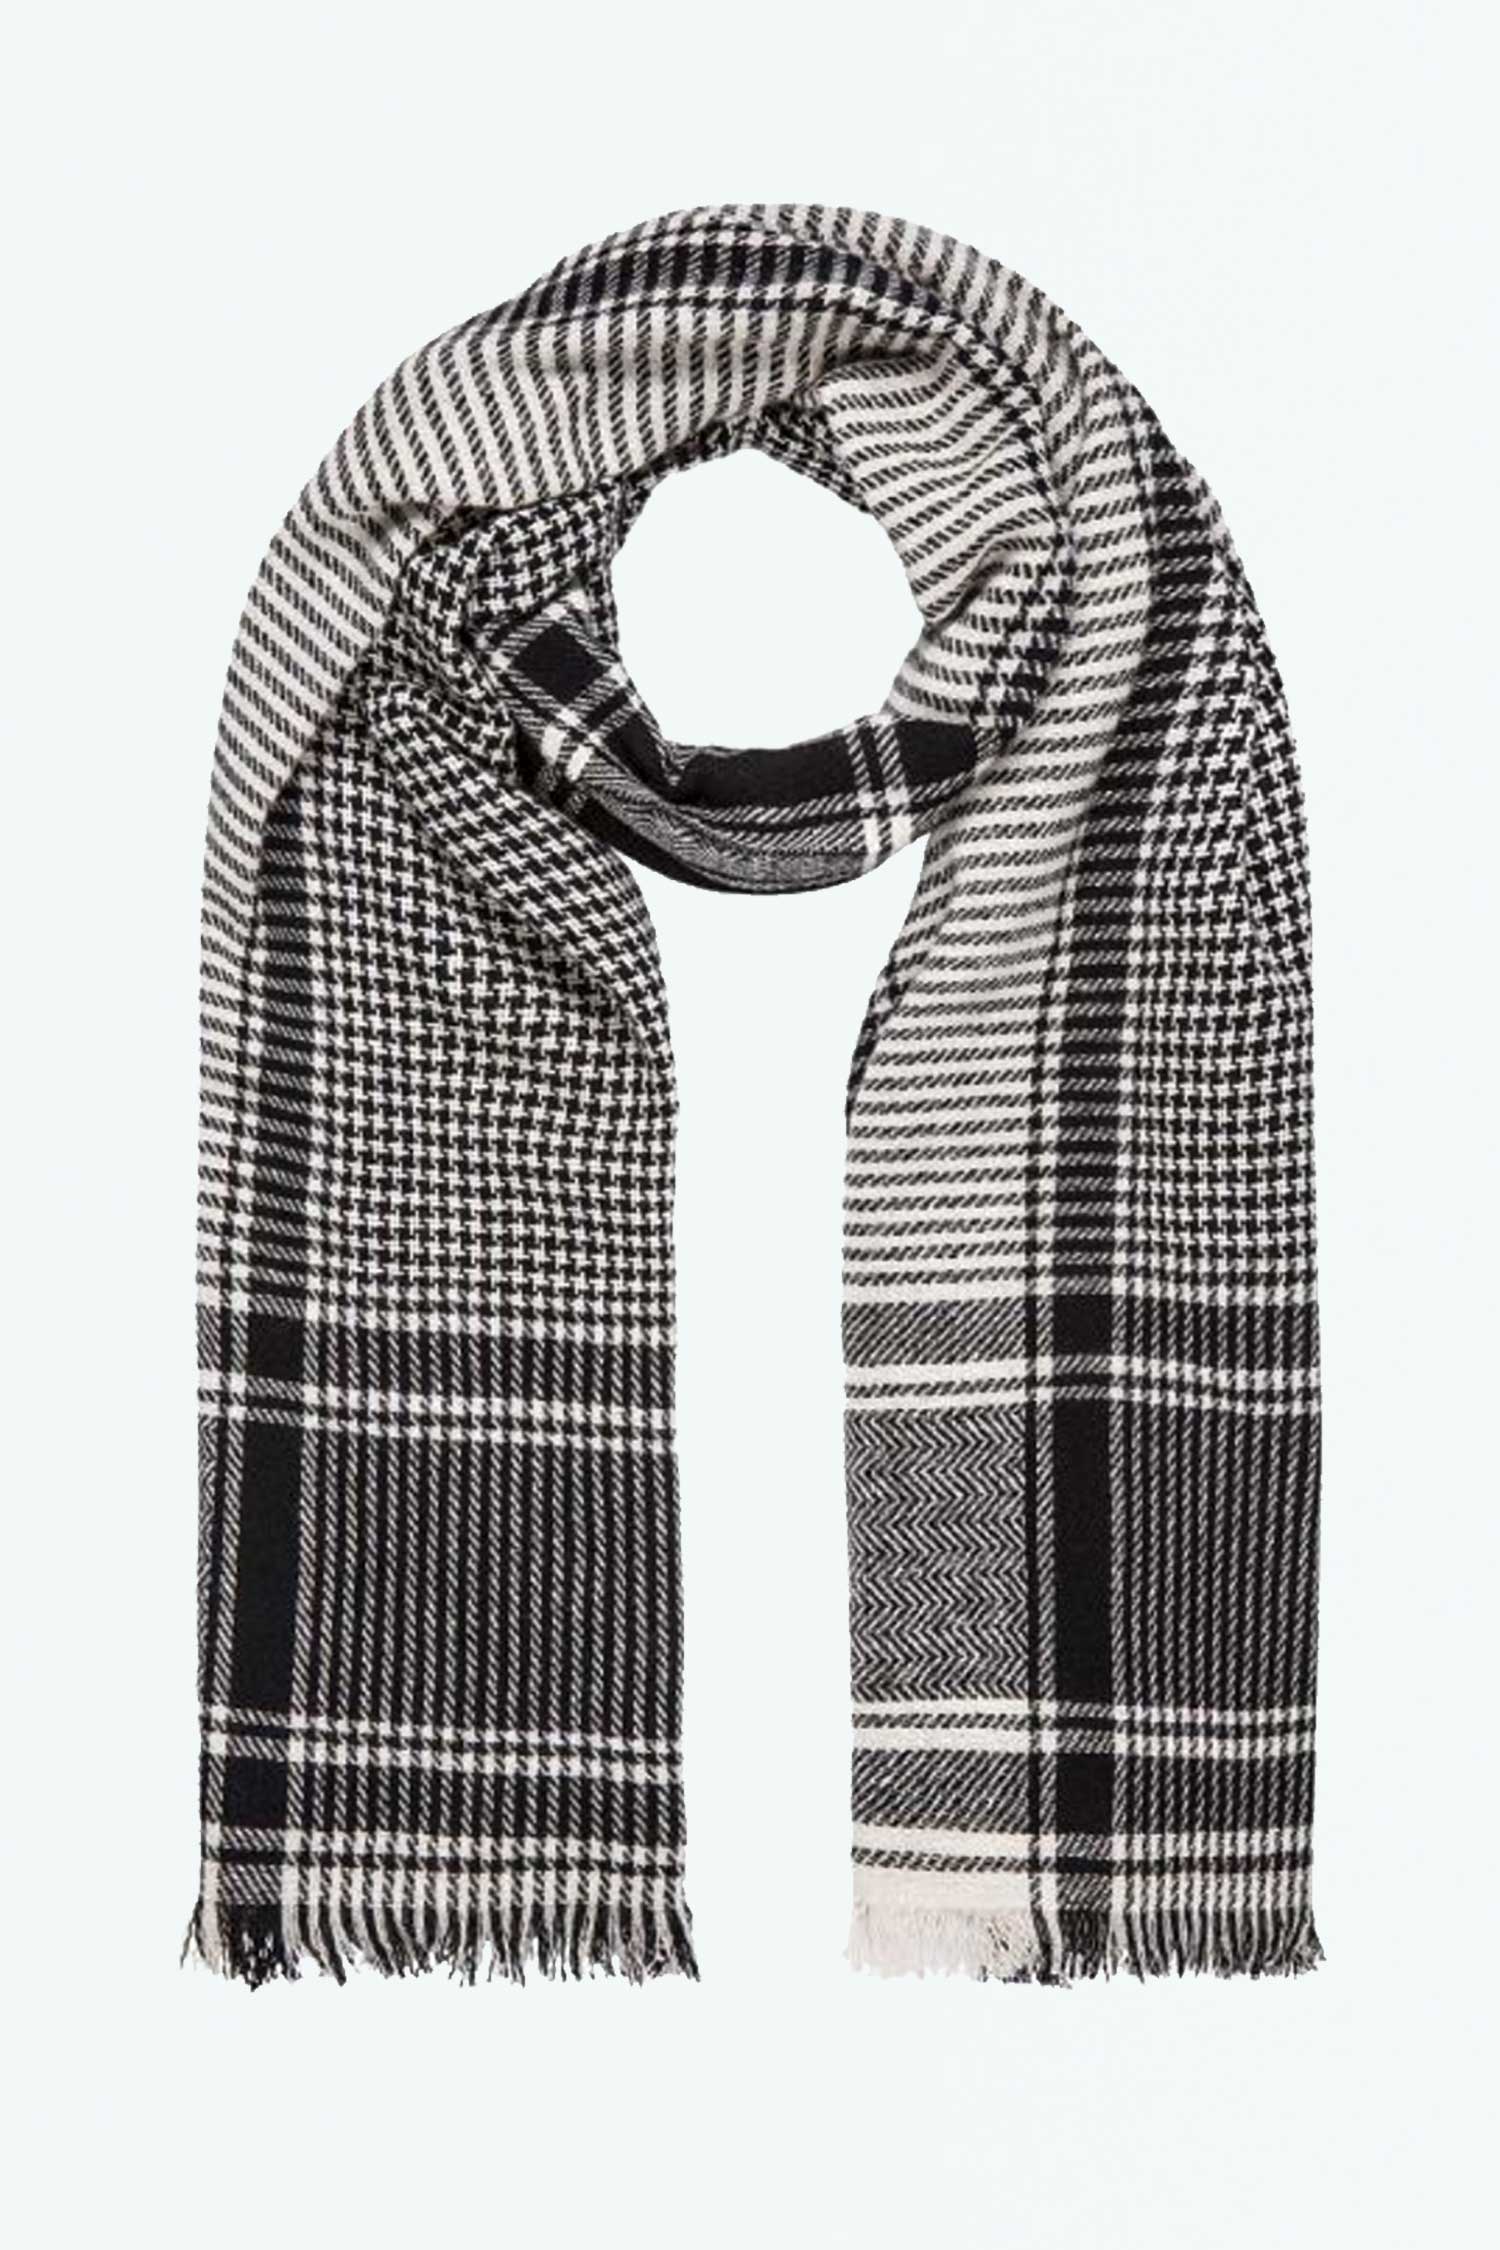 Cashmere houndstooth stole - The Whisper Gallery